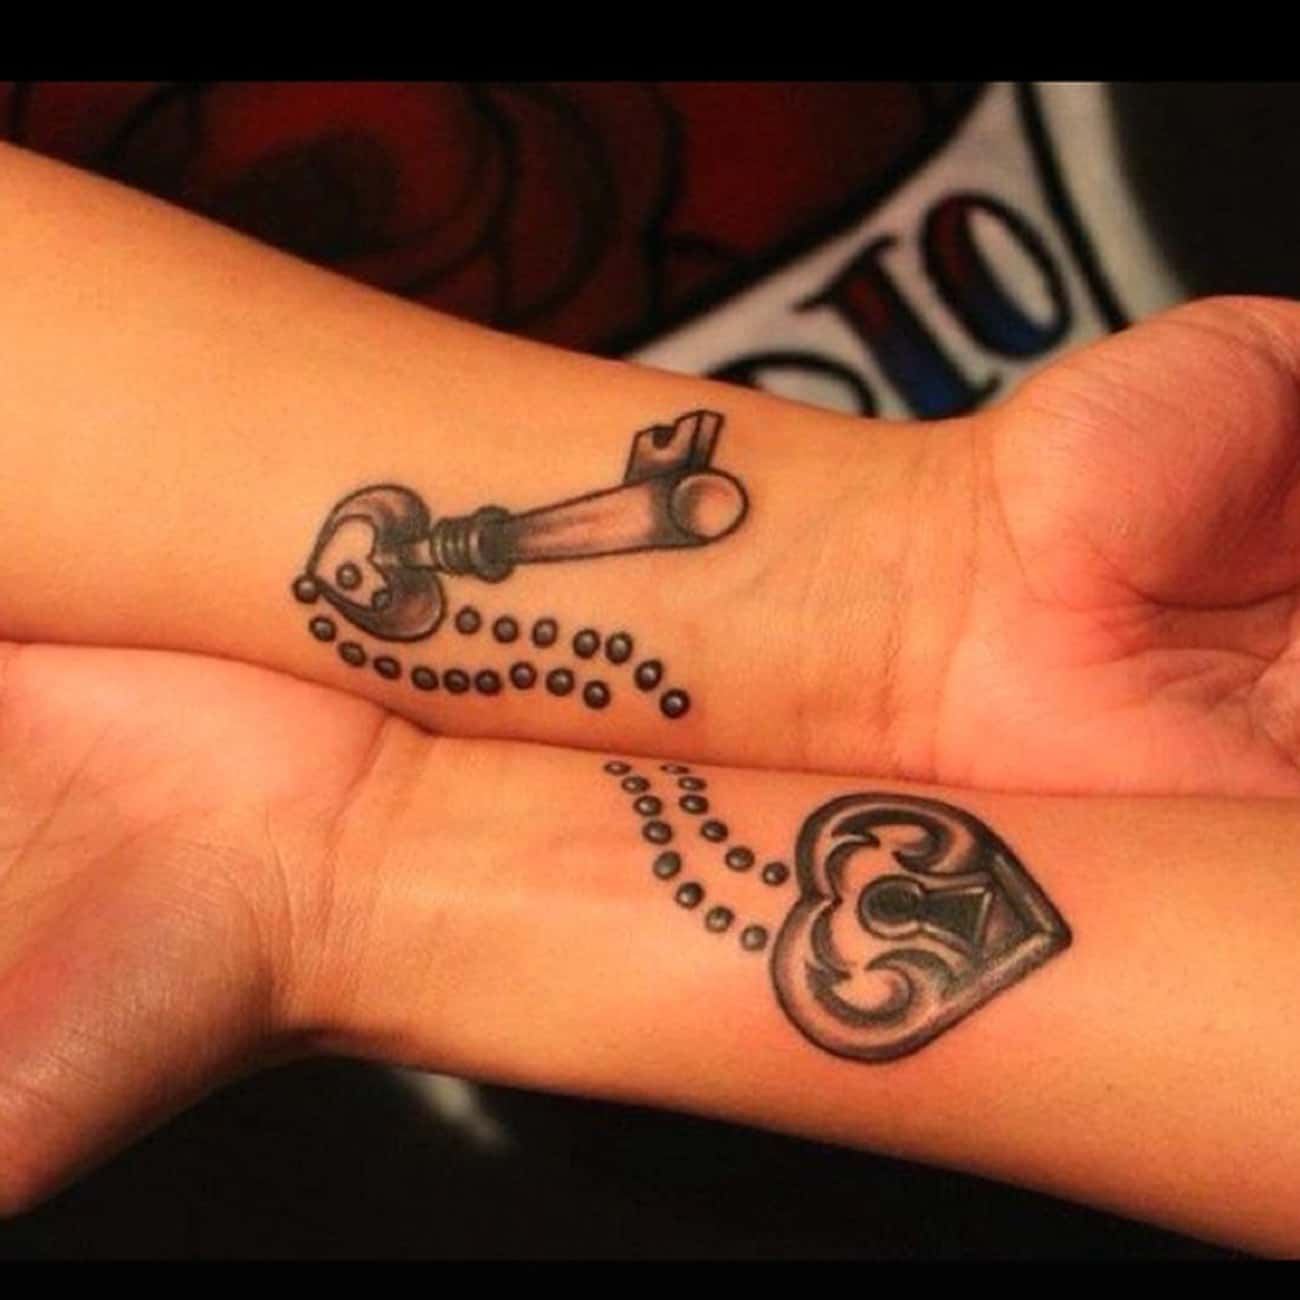 These Tattoos Are a Cool Way to Give Your Love the Key to Your Heart